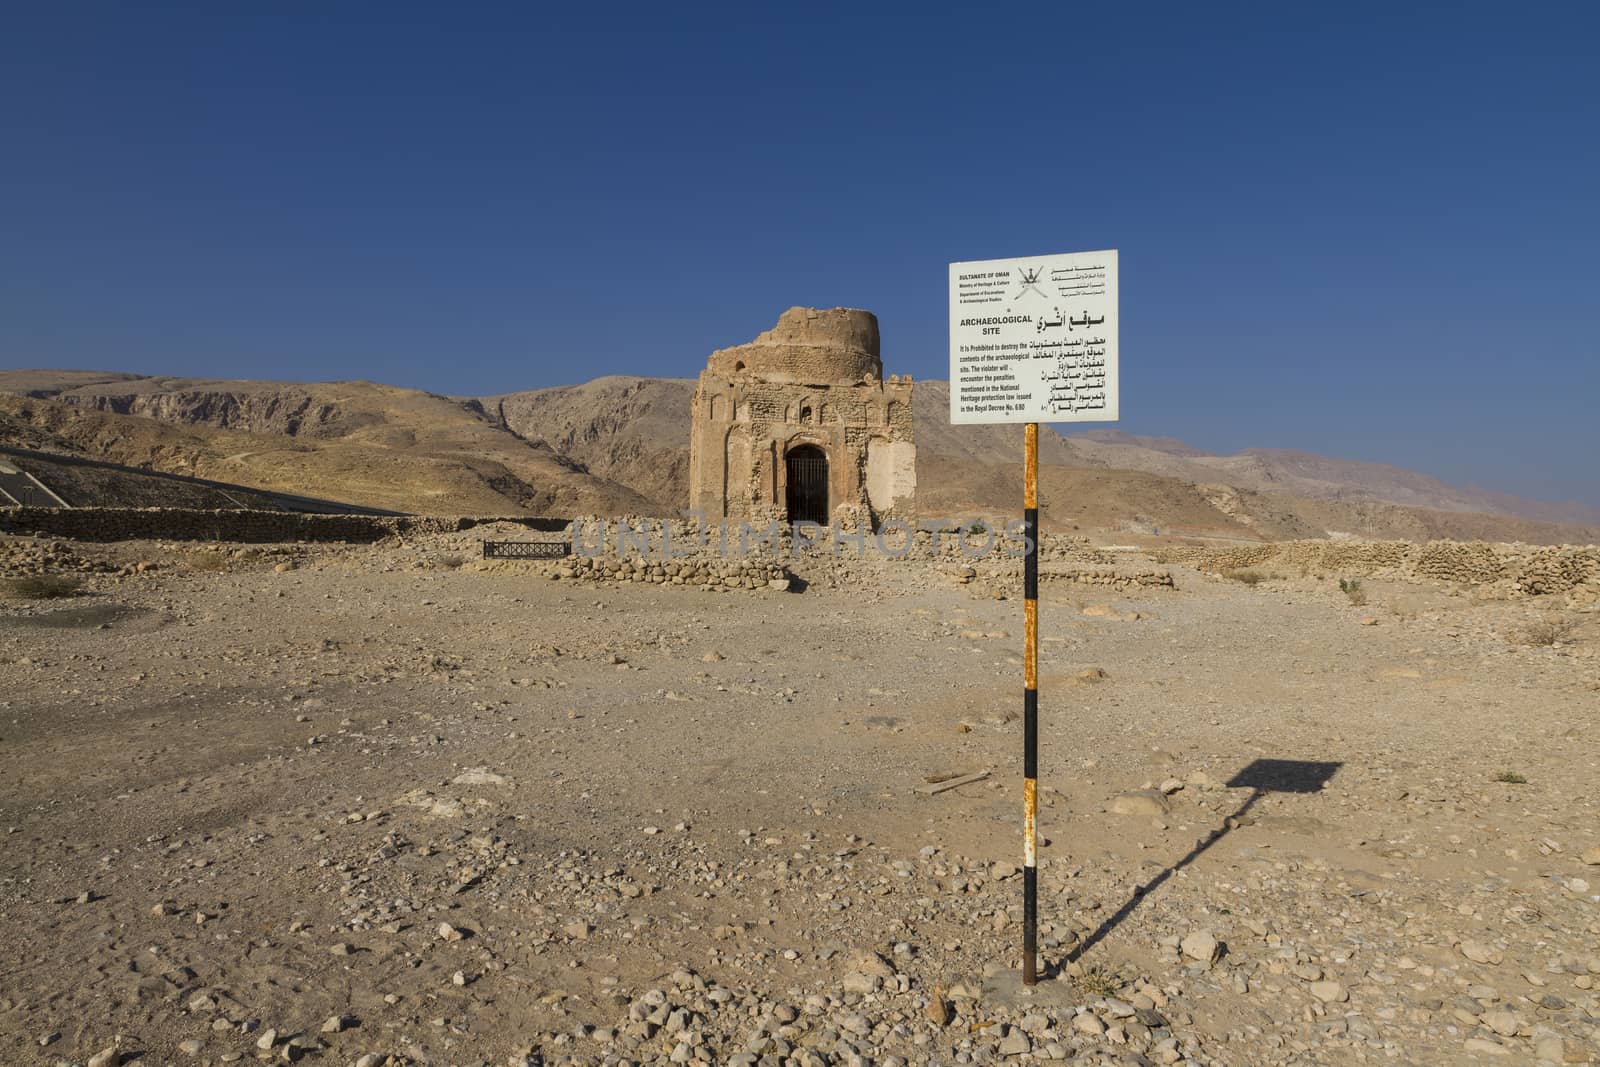 Bibi Maryam mausoleum in the ancient city of Qalhat near Sur,Oman. This site was added to the UNESCO World Heritage Tentative List - image